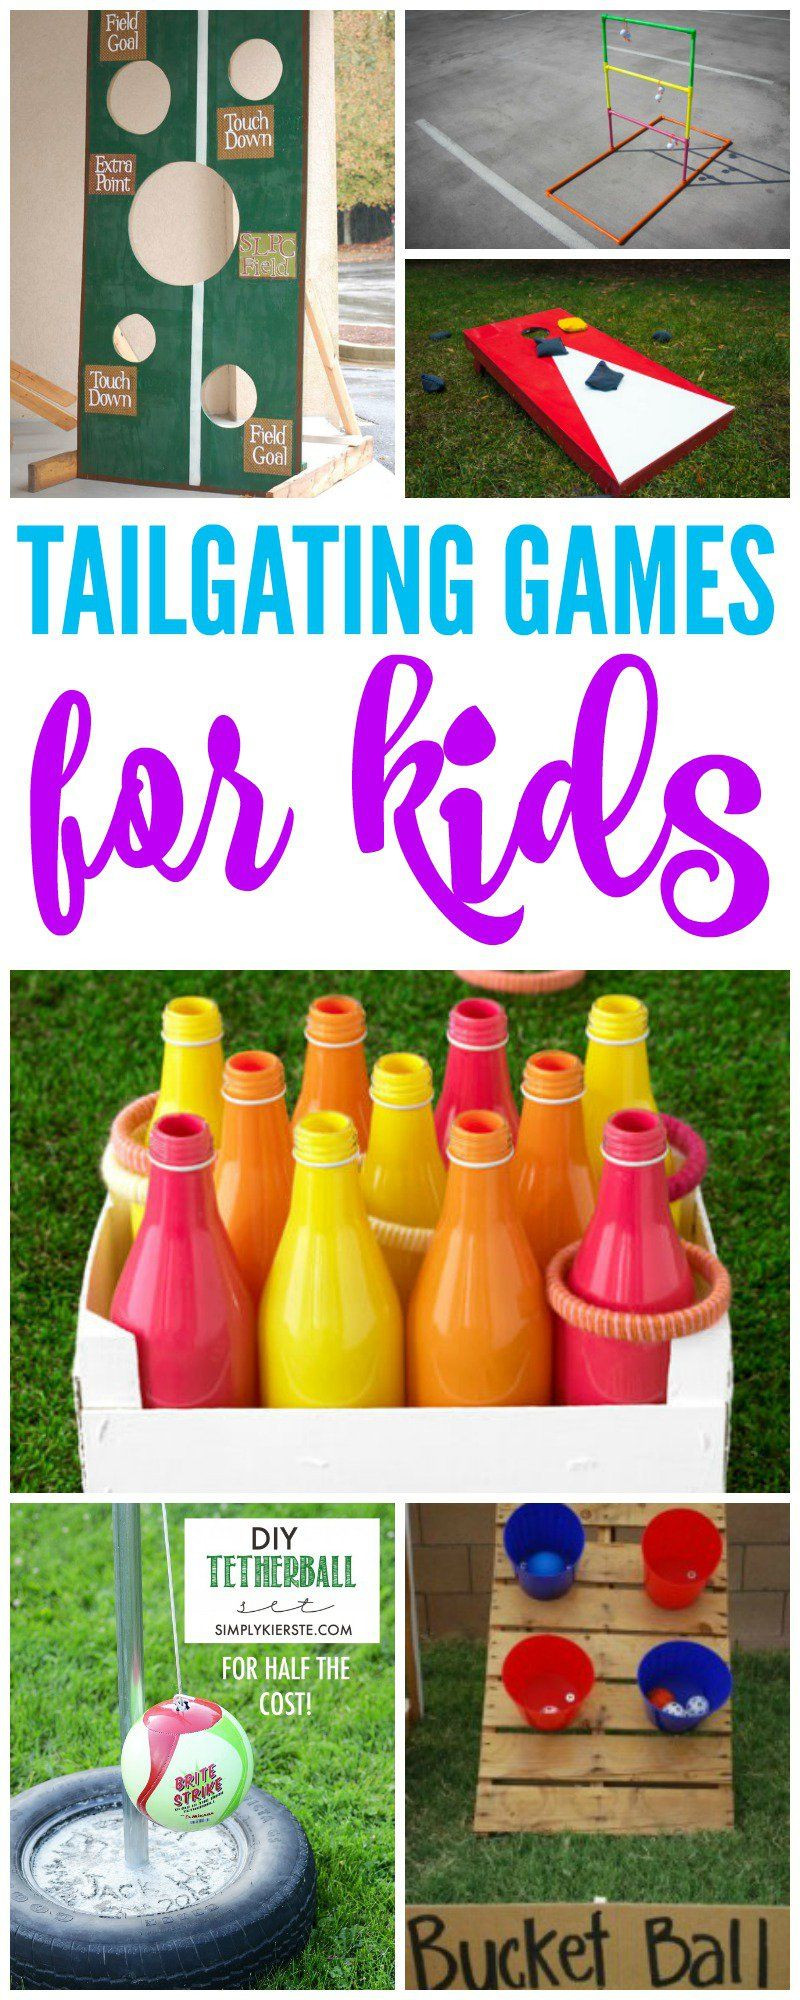 DIY Kids Party Games
 Tailgate Games for Kids In the yard before the game